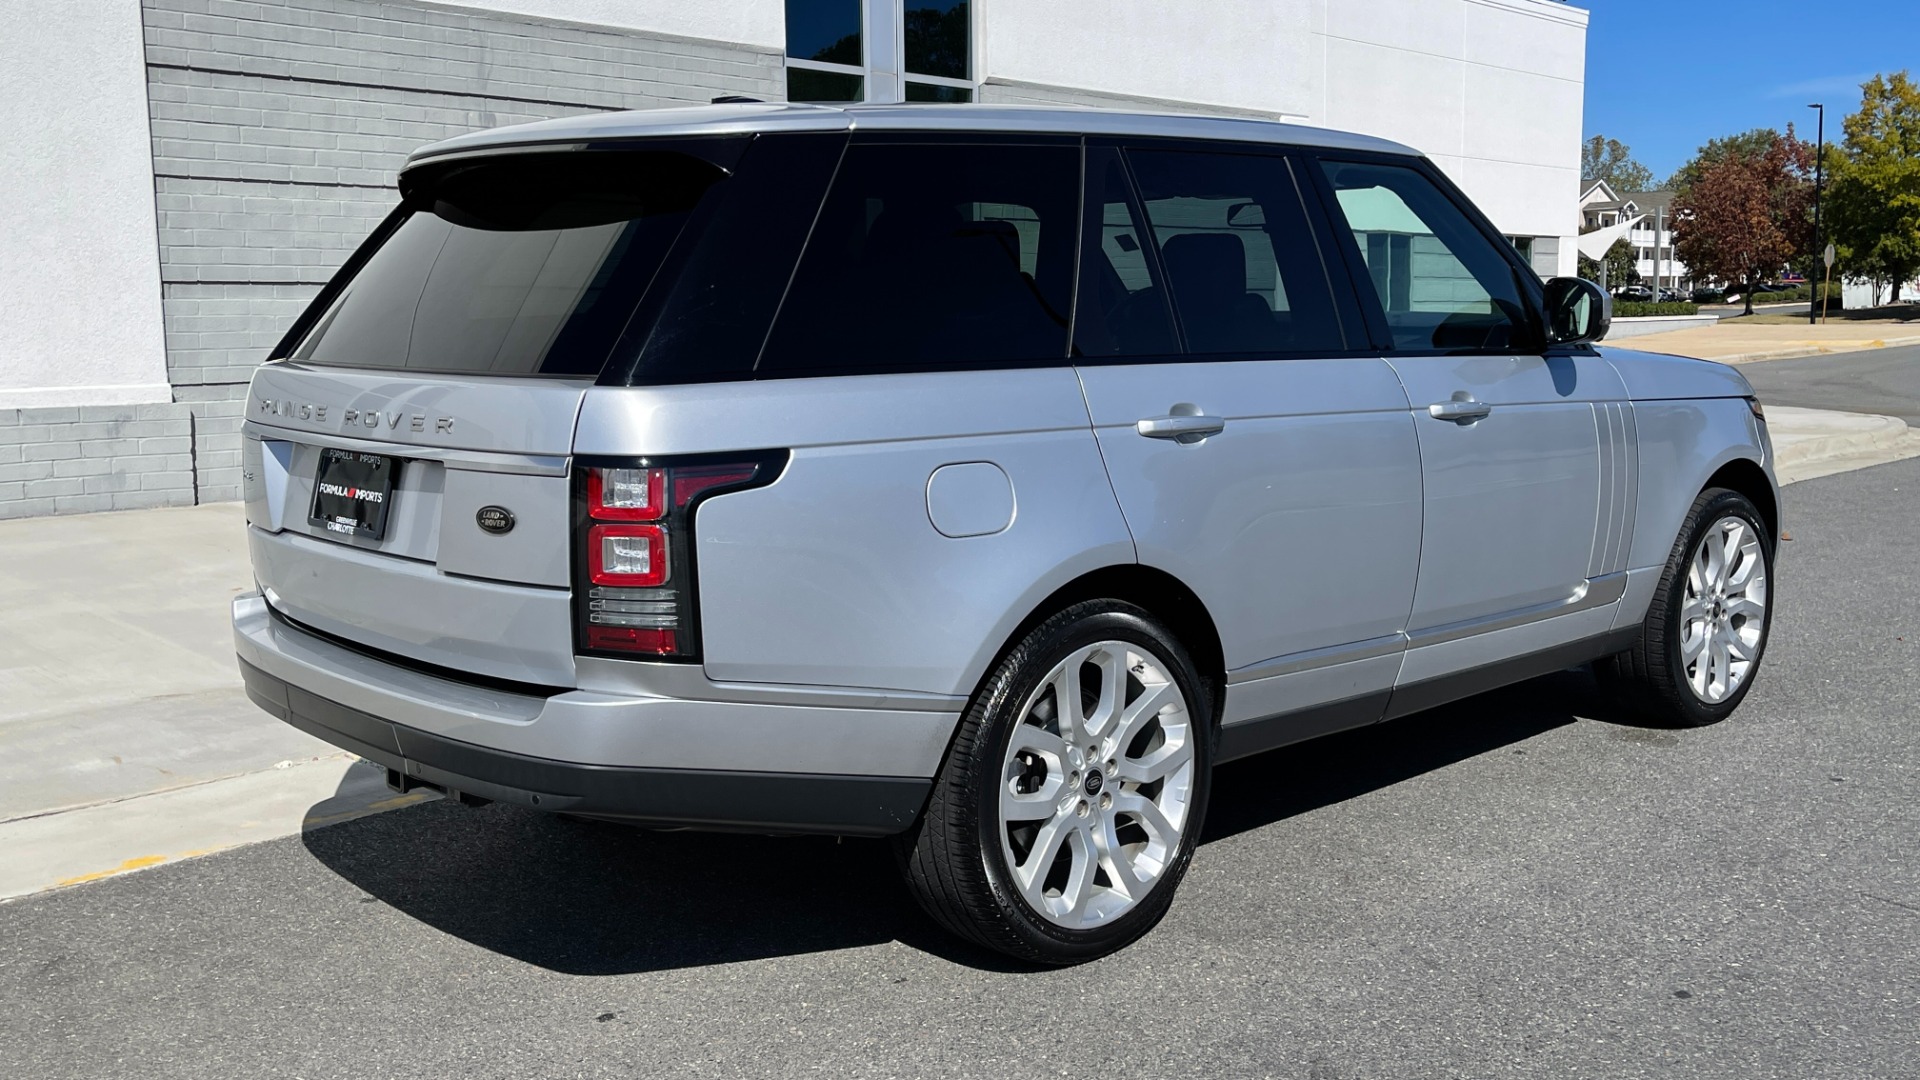 Used 2013 Land Rover Range Rover HSE / 22IN WHEELS / CLIMATE PACKAGE / SOFT CLOSE / VISION ASSIST for sale Sold at Formula Imports in Charlotte NC 28227 4